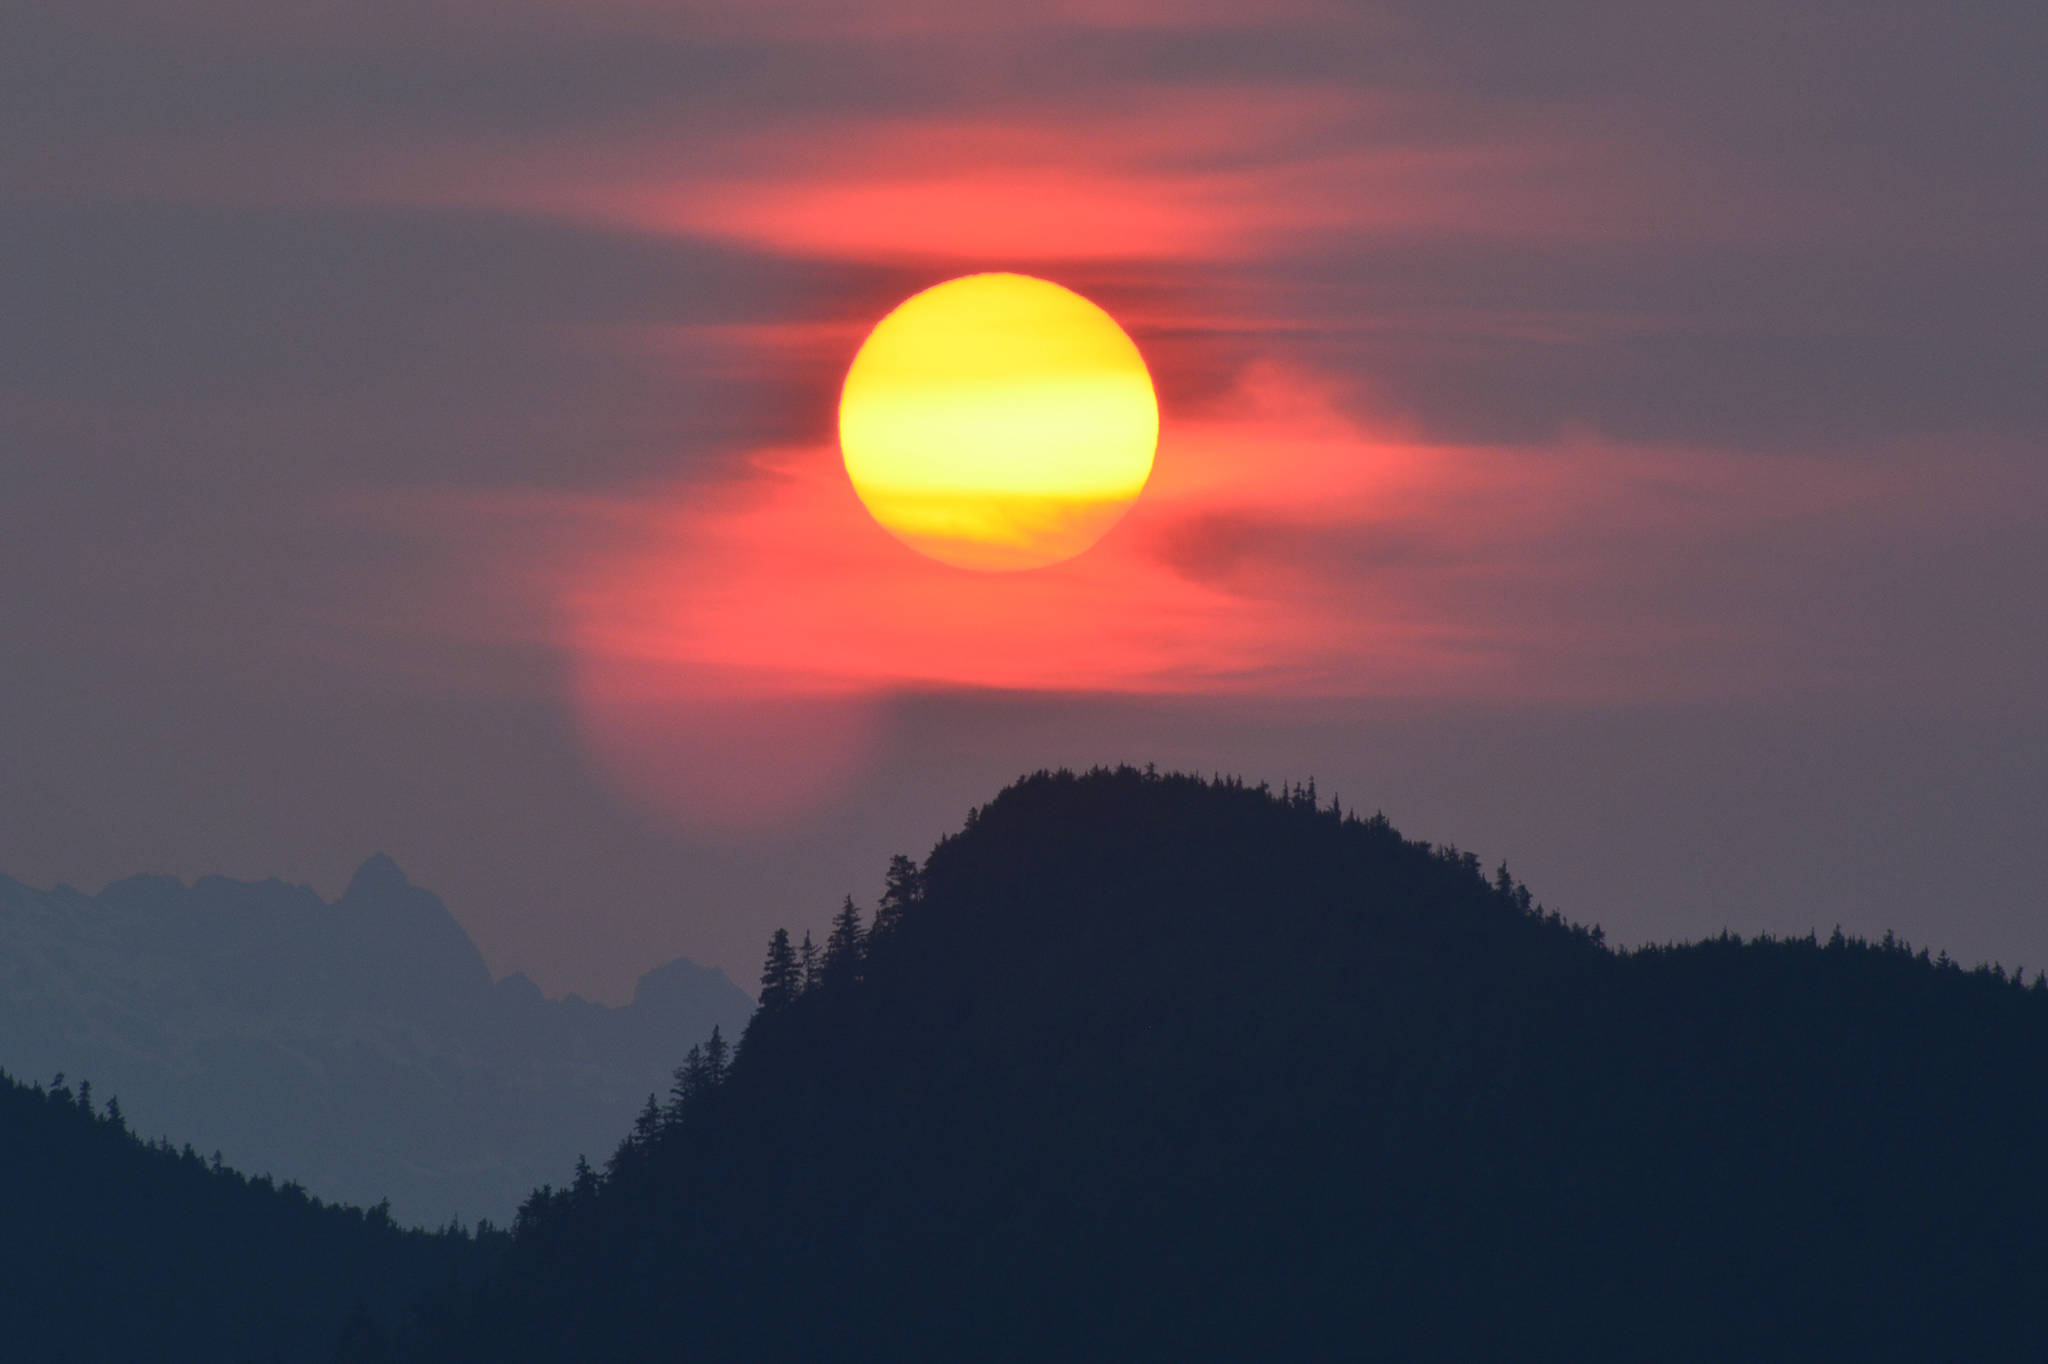 The sun sets over Lincoln Island in the foreground and the Chilkat Peninsula mountains in the background during the recent smoke and haze event that affected the Juneau area. The photo was taken in the Saginaw Channel area on June 30, 2019. (Courtesy Photo | Jerry Reinwand)